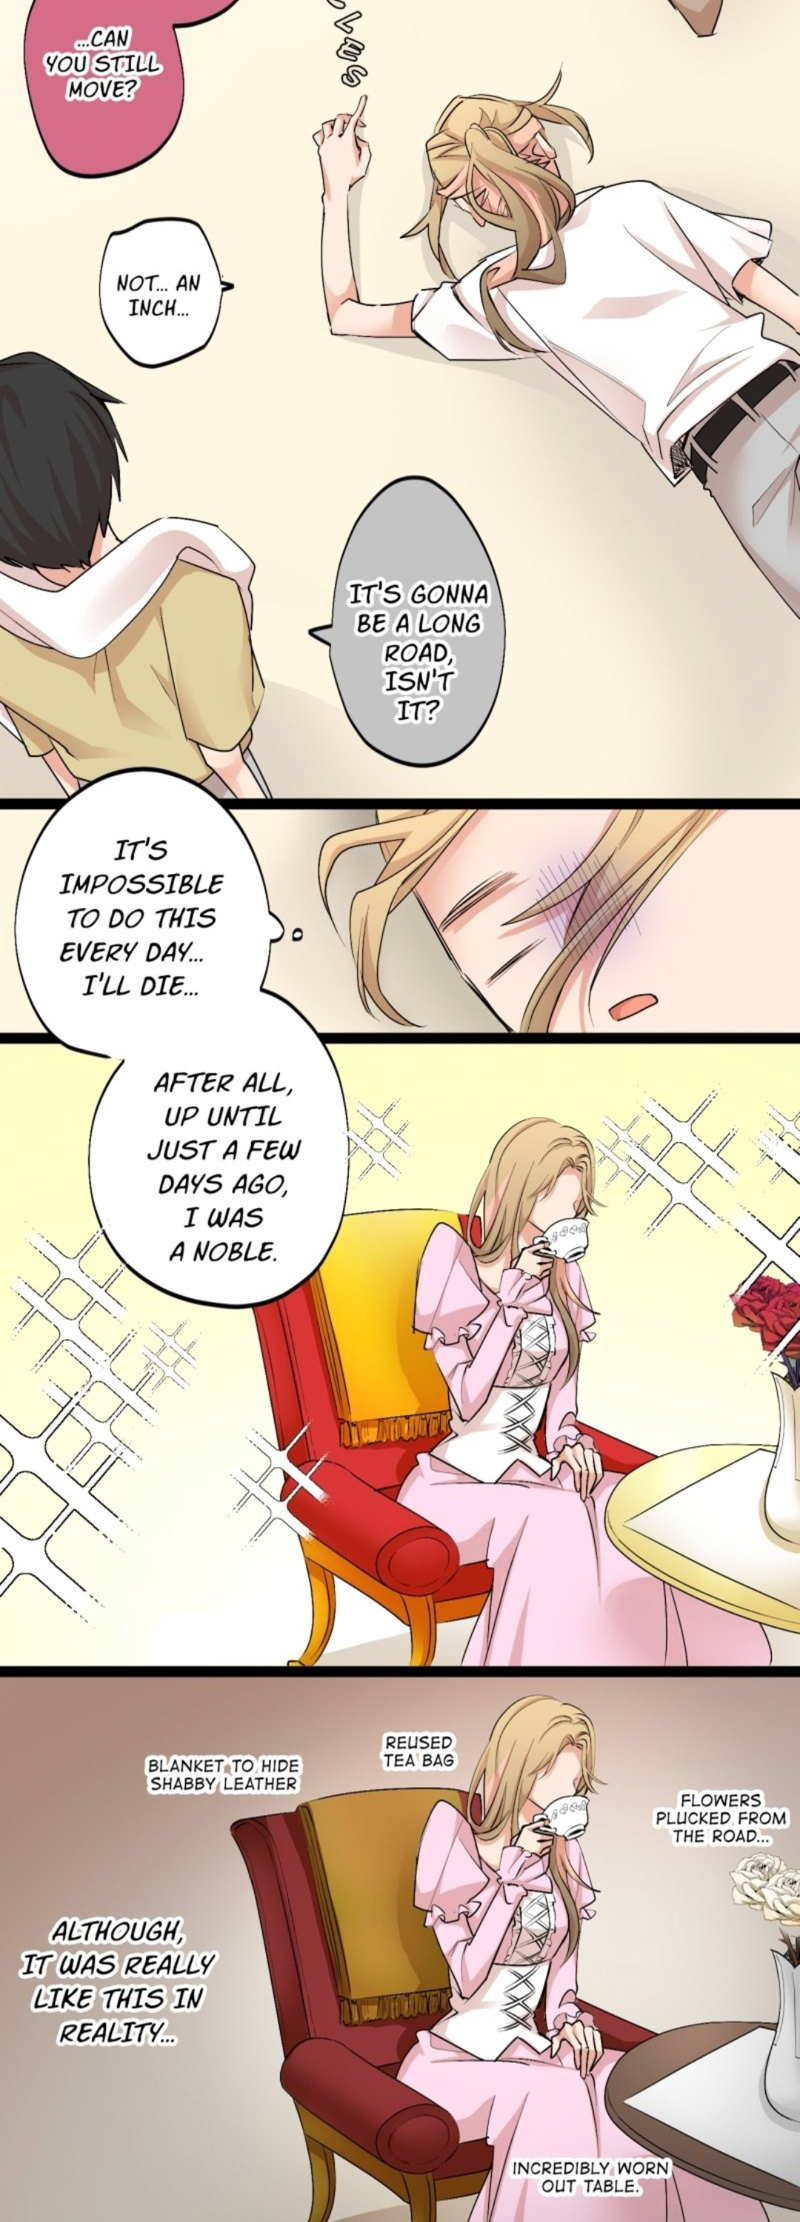 Court Swordswoman in Another World Chapter 5 page 12